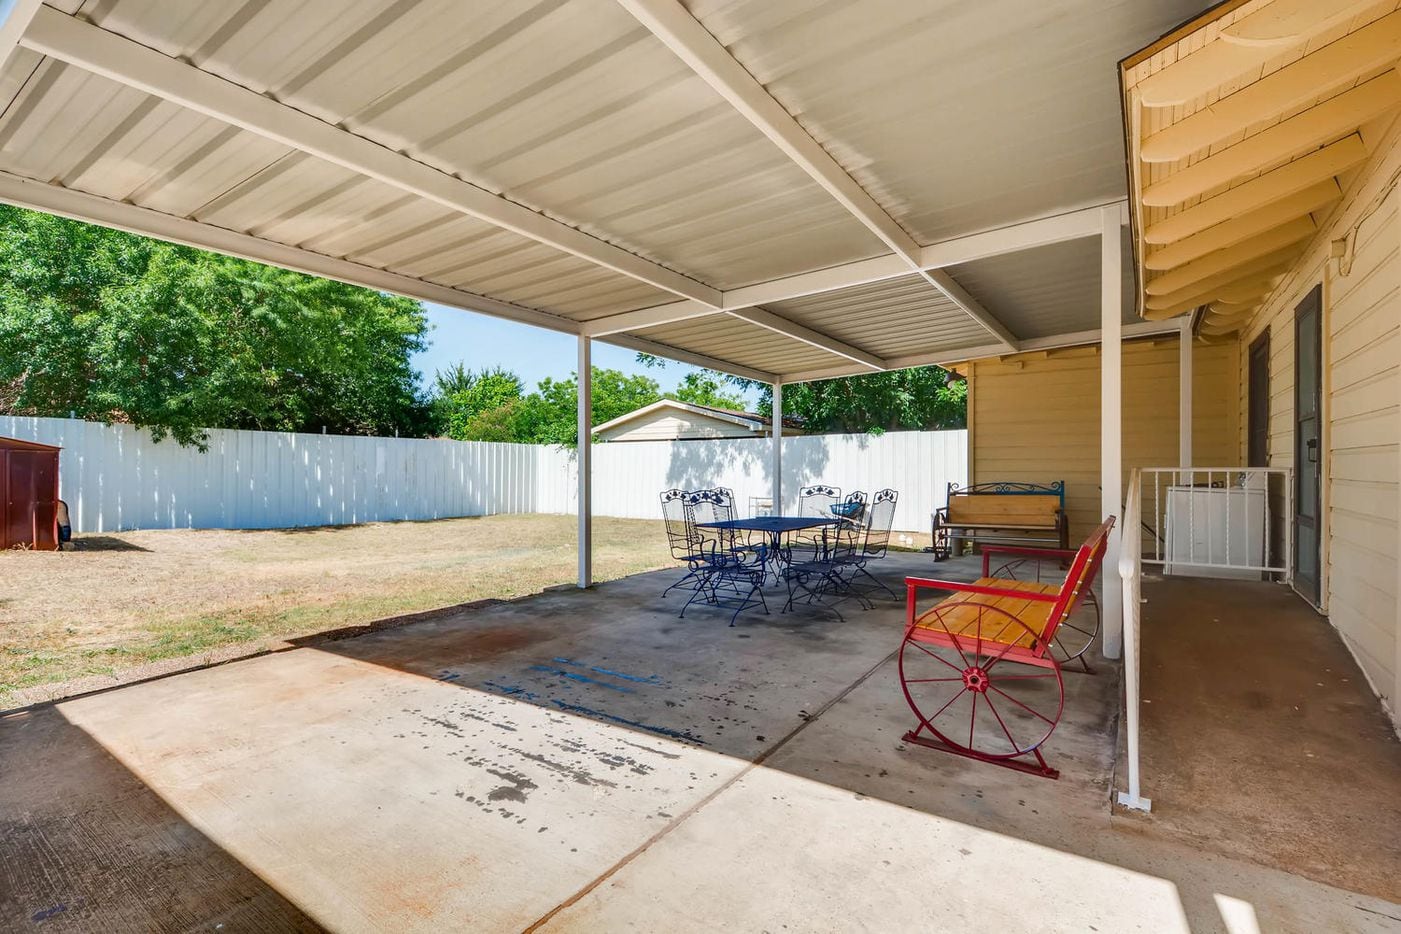 2557 Glenfield Avenue, located in the Oak Cliff neighborhood of Dallas, is for sale for...